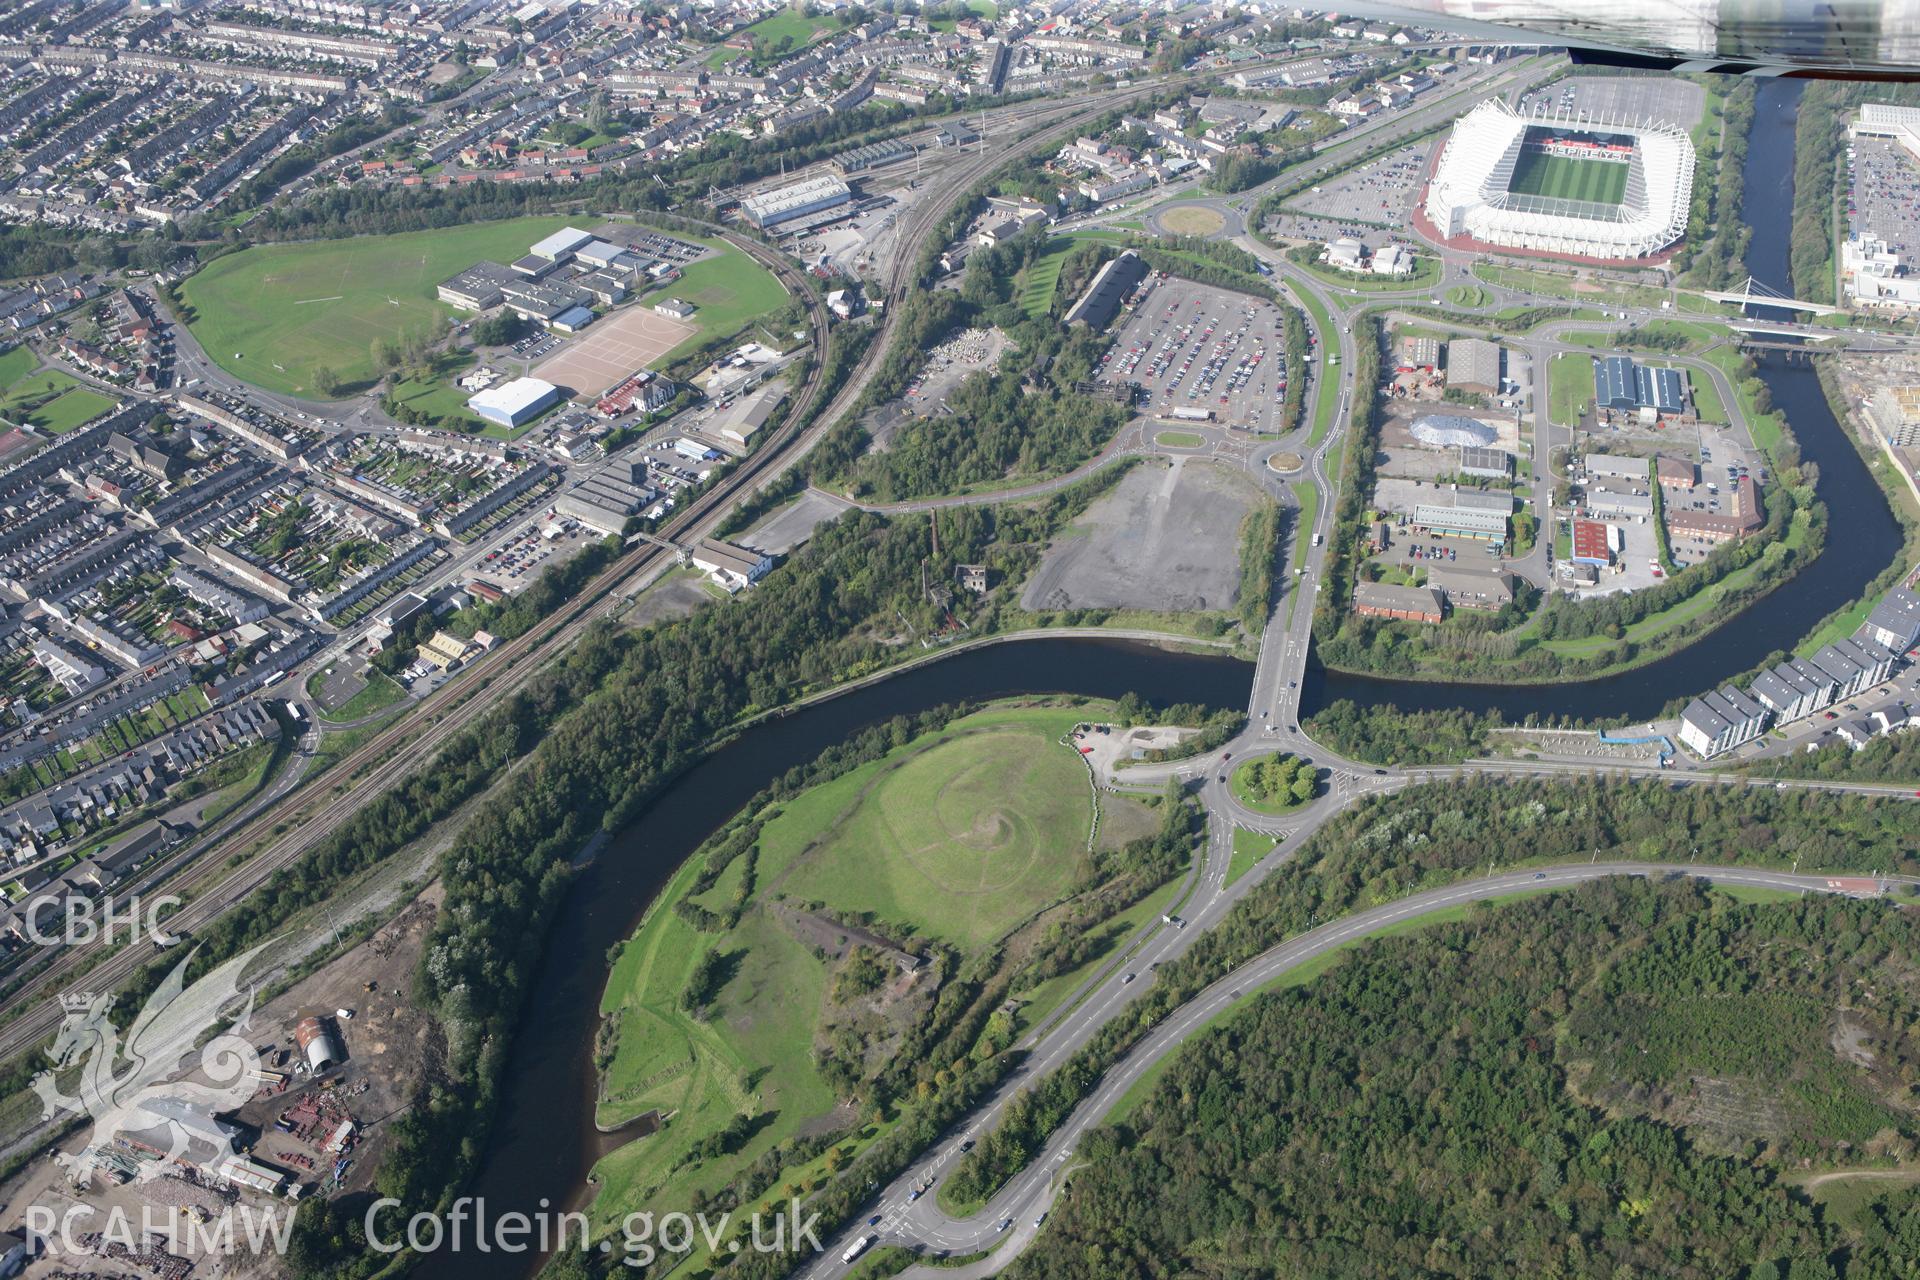 RCAHMW colour oblique photograph of River Tawe and Liberty Stadium from the south-west. Taken by Toby Driver and Oliver Davies on 28/09/2011.